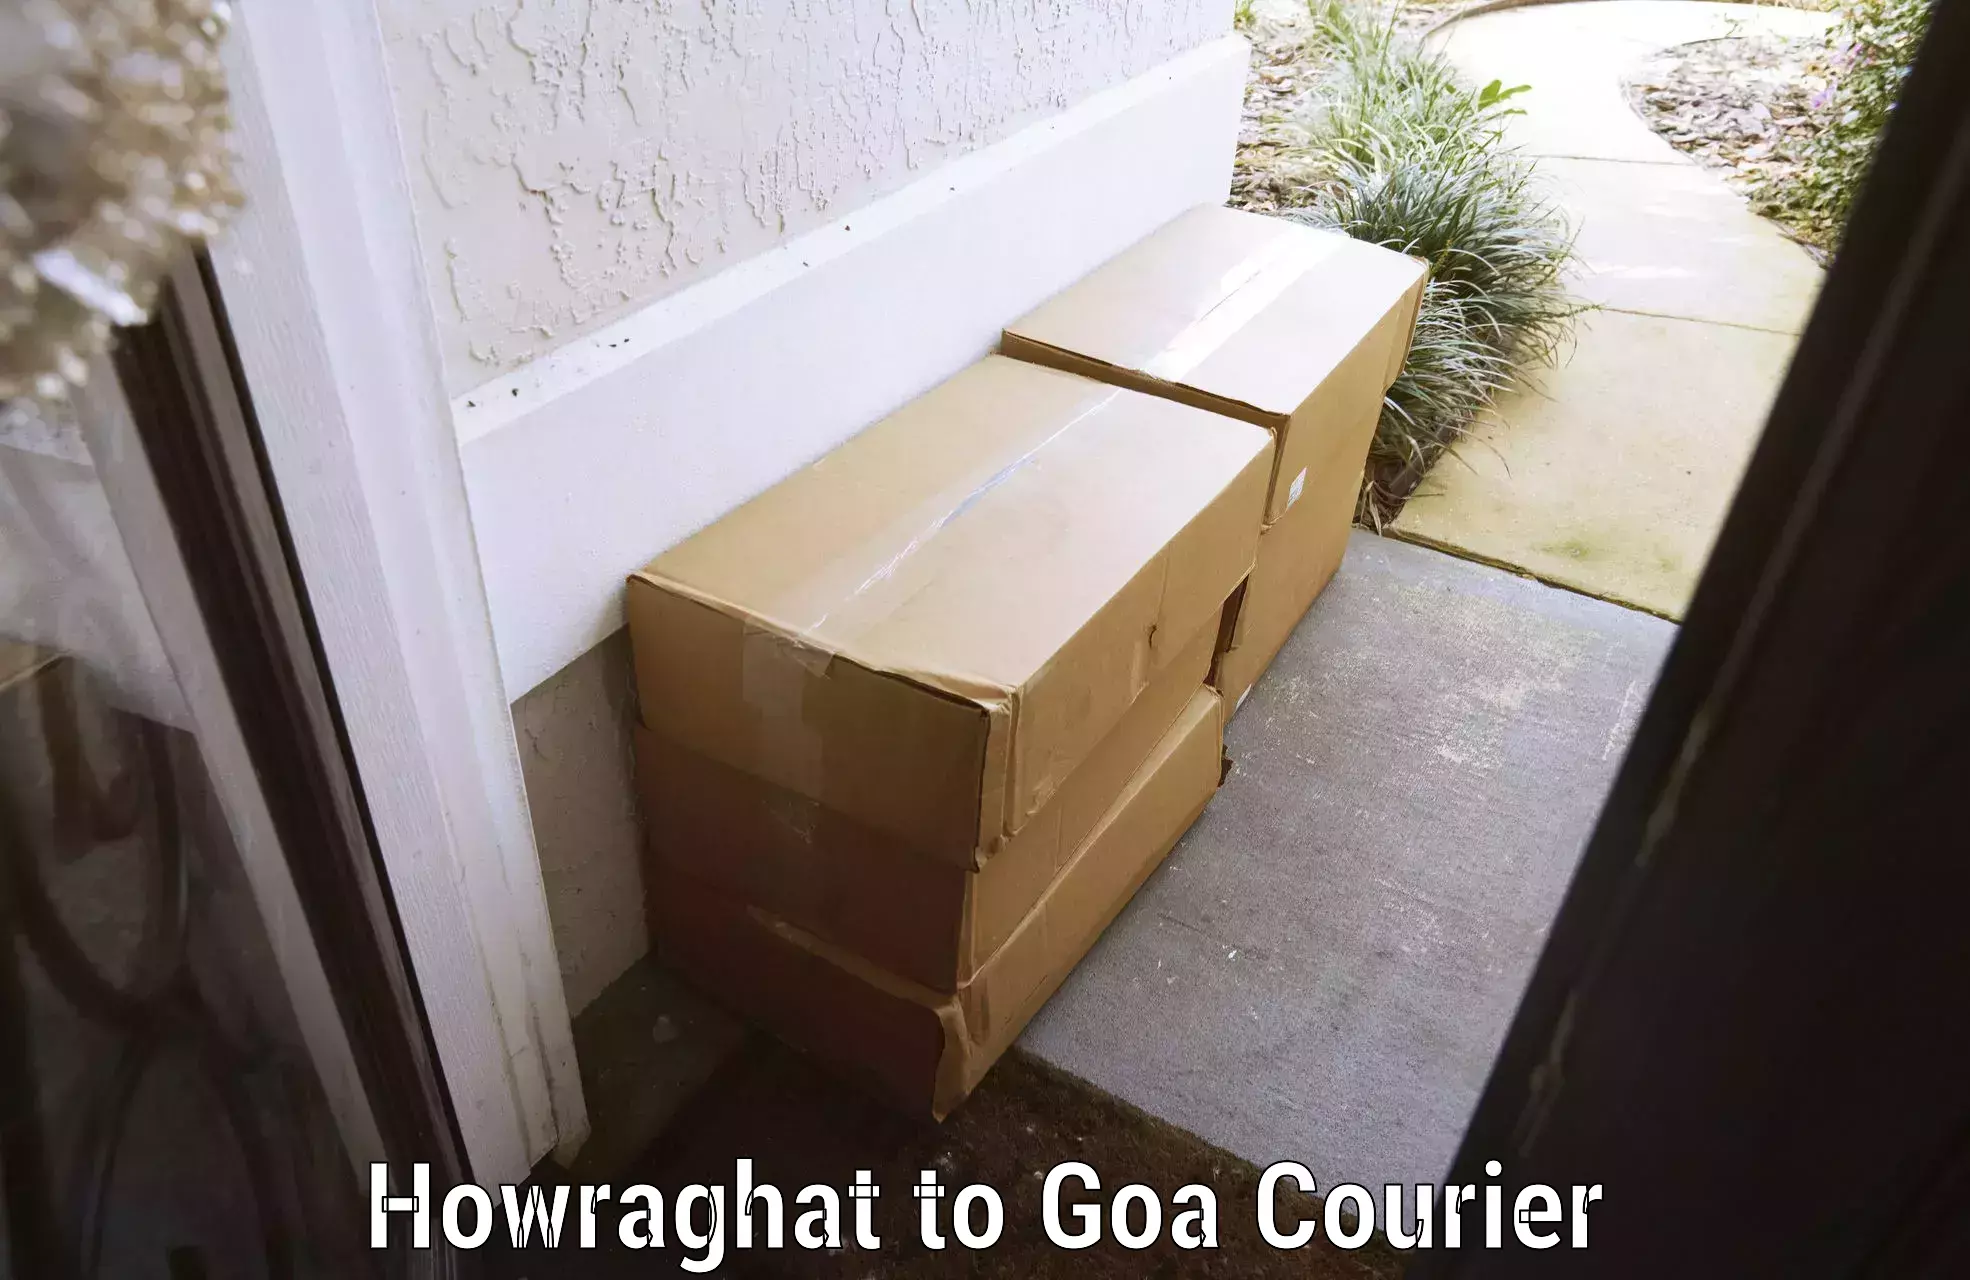 Baggage shipping service Howraghat to Goa University